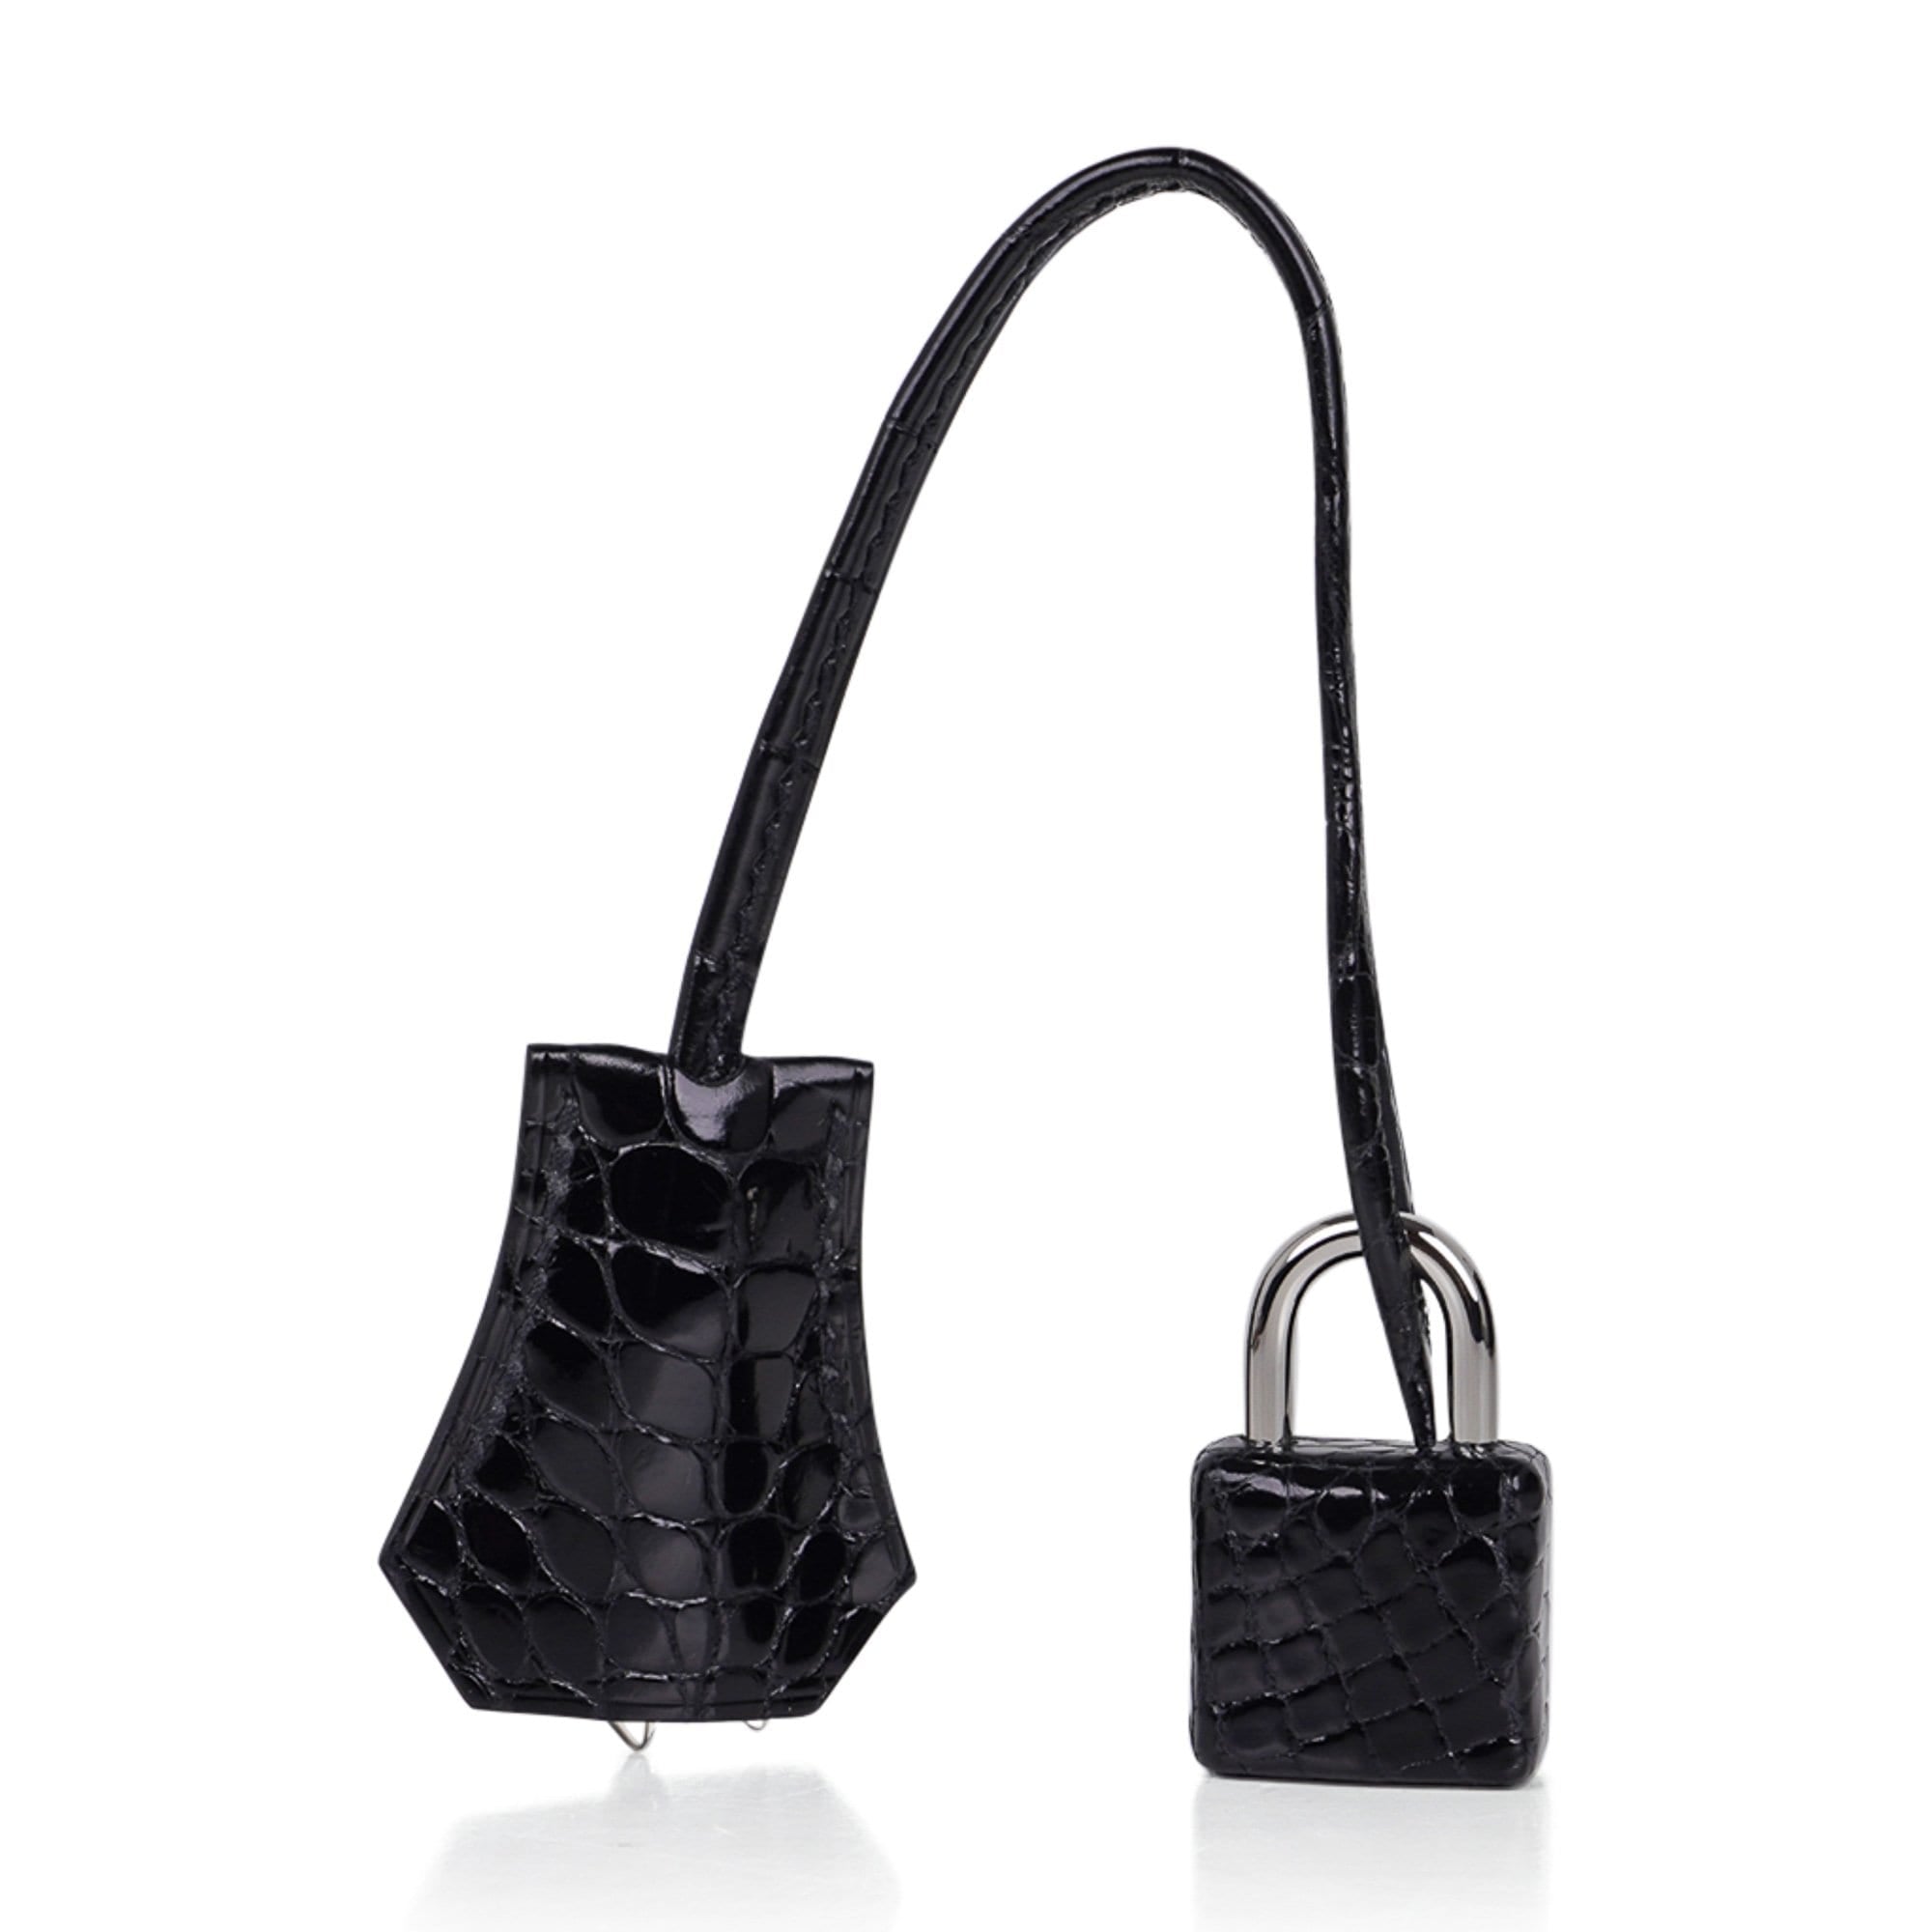 Hermes Kelly 25 Crocodile finish Bag in Pakistan for Rs. 95000.00